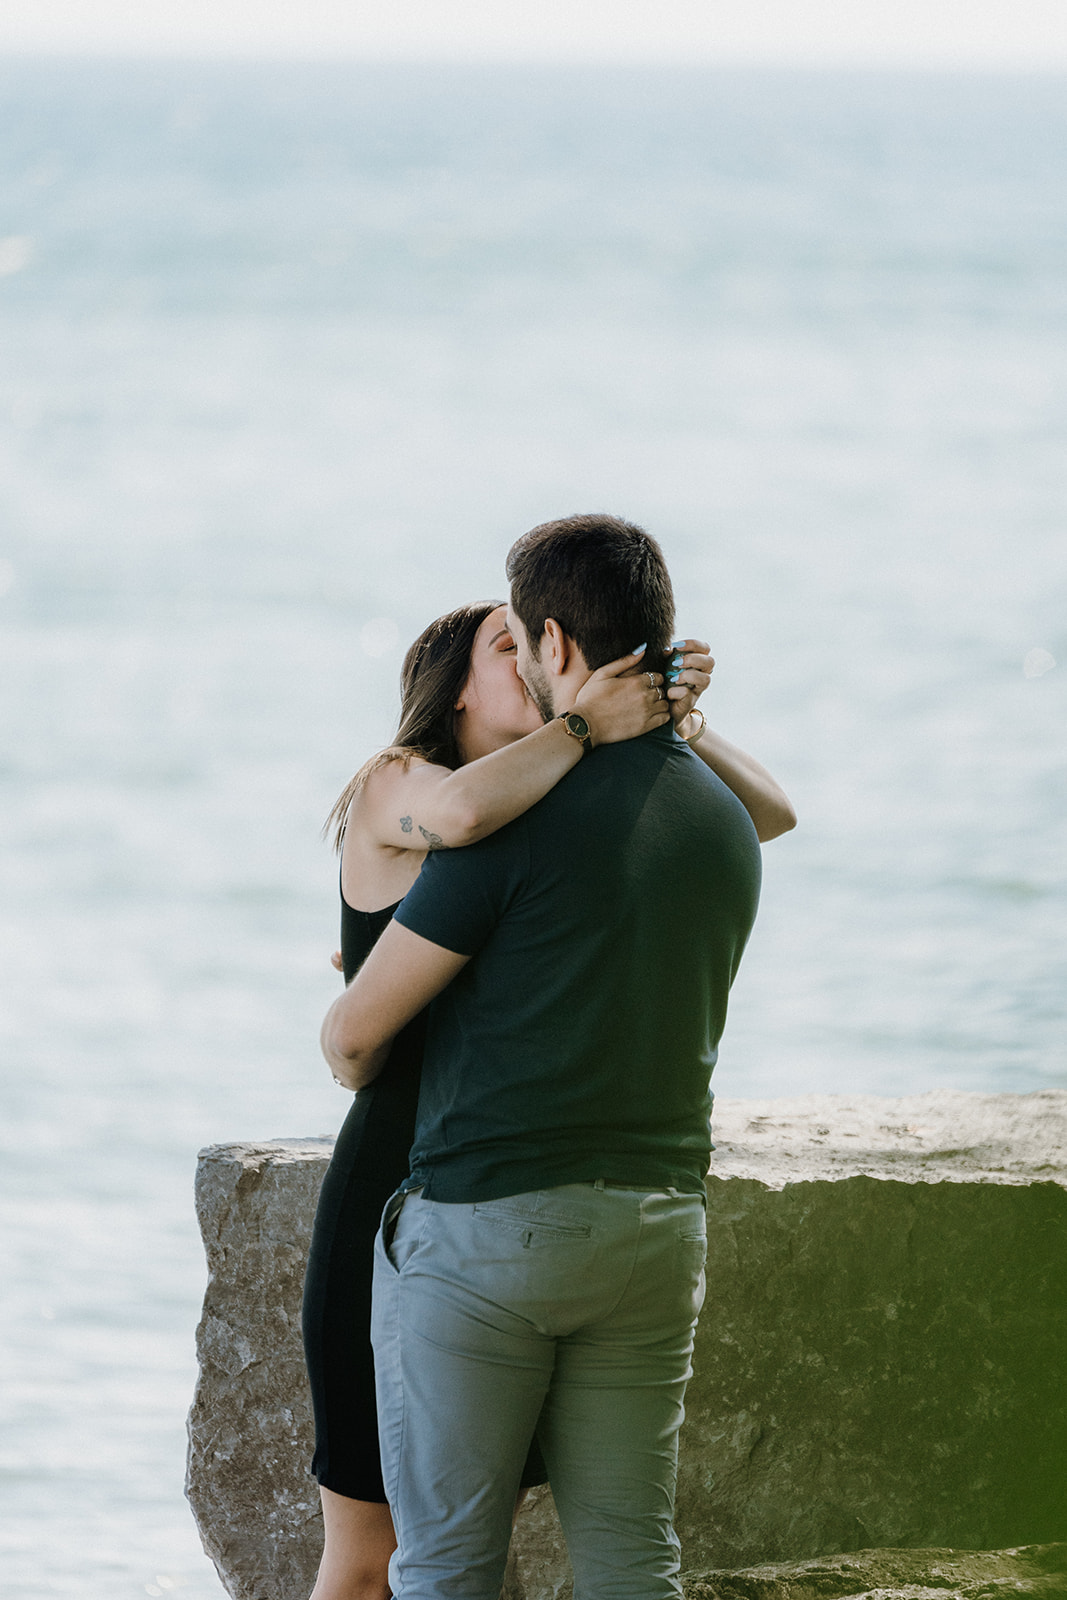 Woman kissing man by the water.